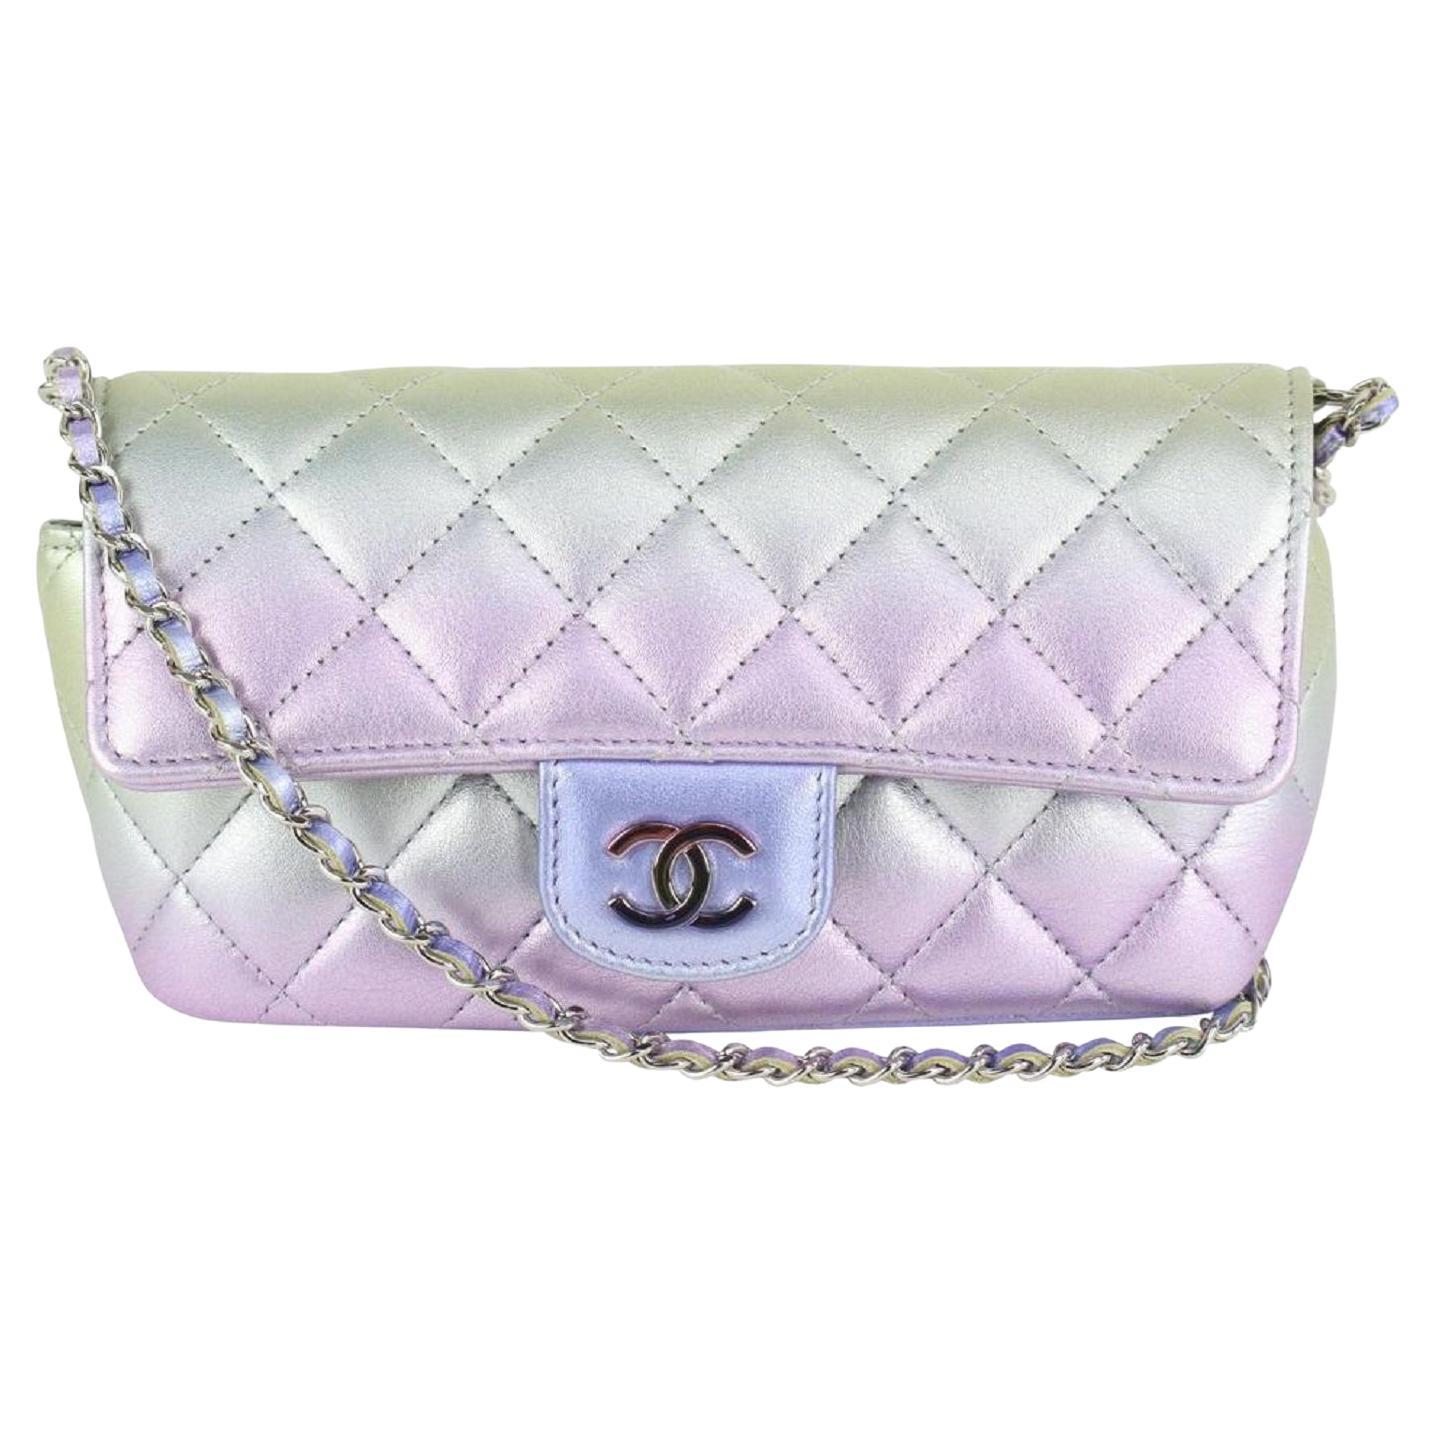 Chanel Pink Ombre Leather Mini Rectangular Flap Top Handle Bag